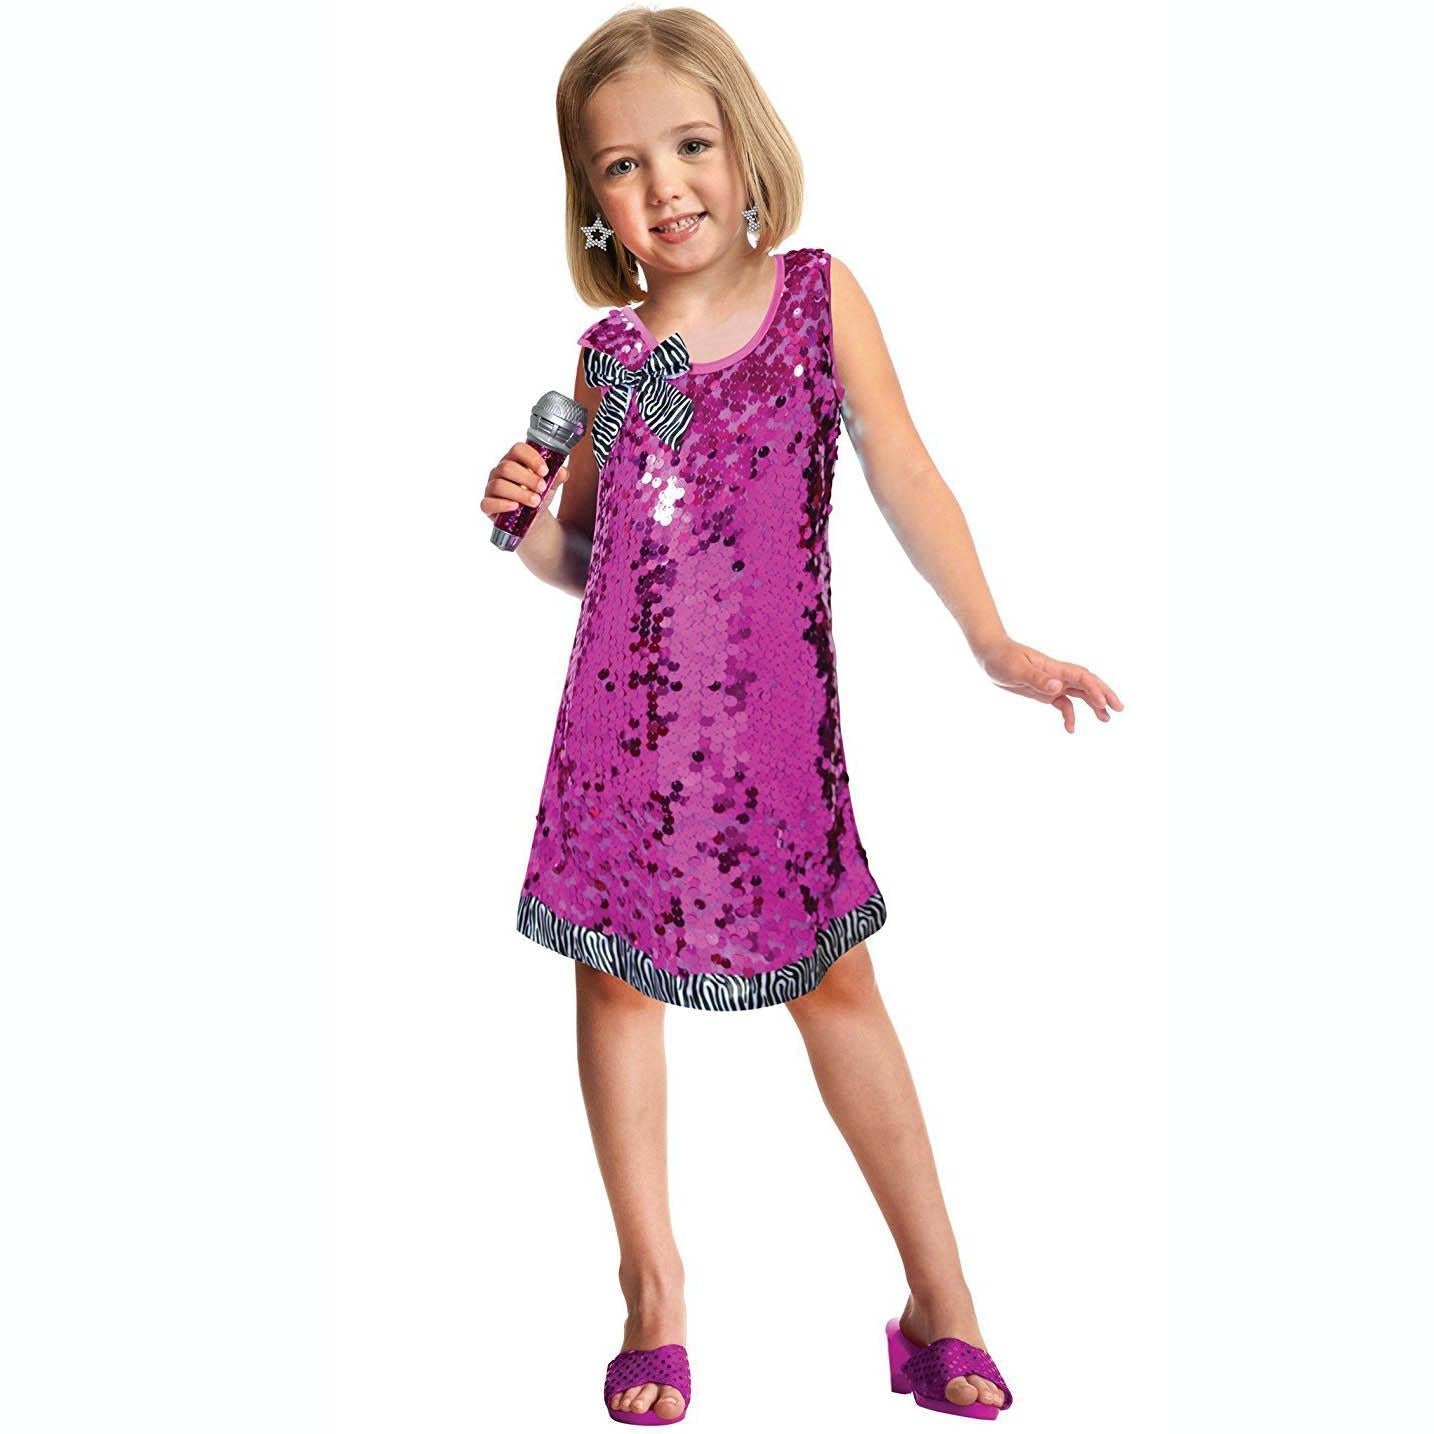 Child Popstar Costume 3-6yrs (One Size) Costumes & Apparel - Party Centre